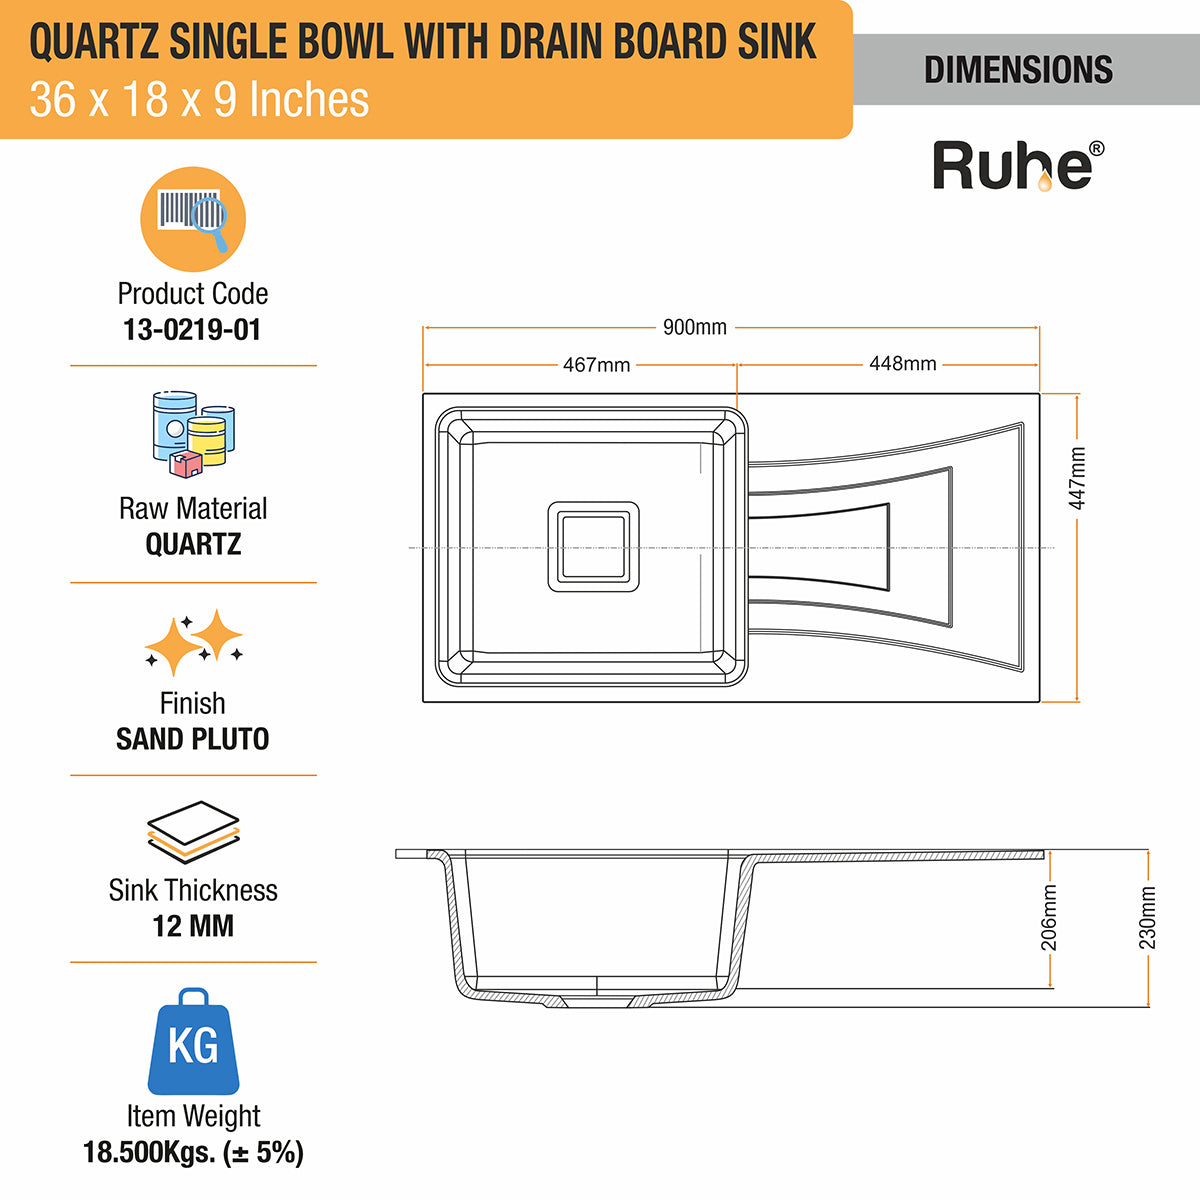 Quartz Single Bowl Sand Pluto Kitchen Sink with Drainboard(36 x 18 x 9 inches) dimensions and sizes